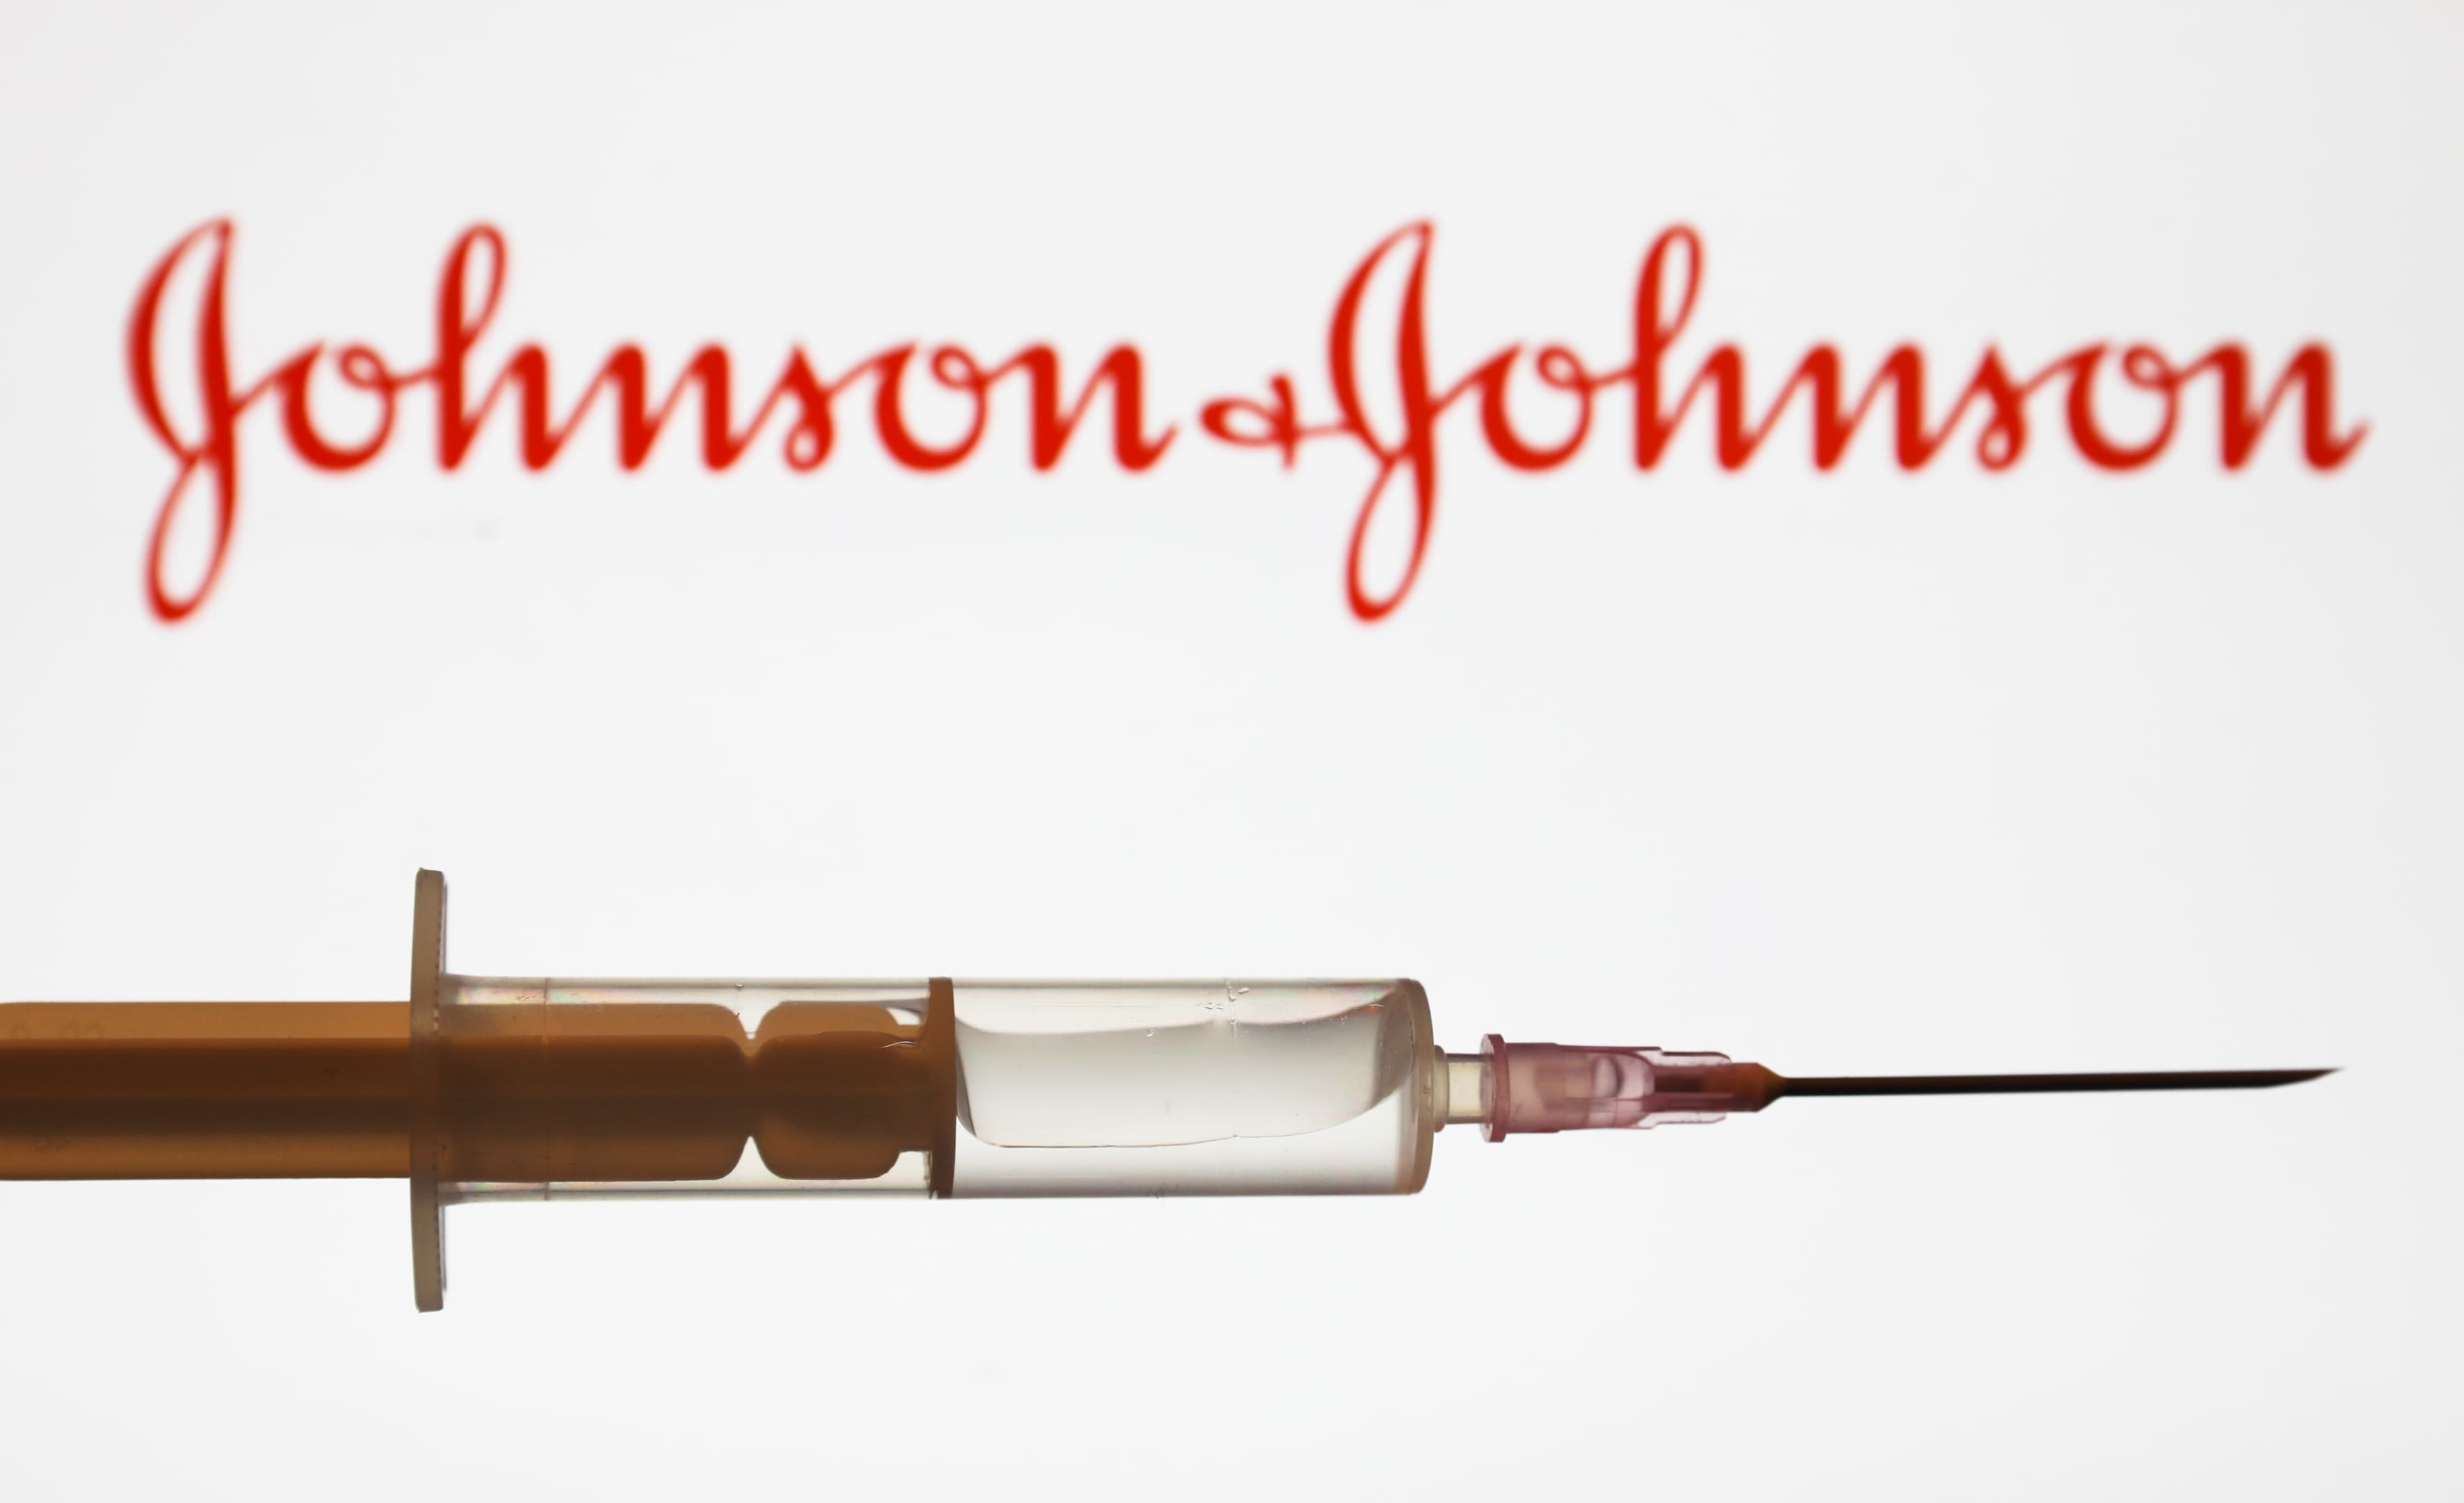 JNJ's coronavirus vaccine trial is paused after 'adverse event'